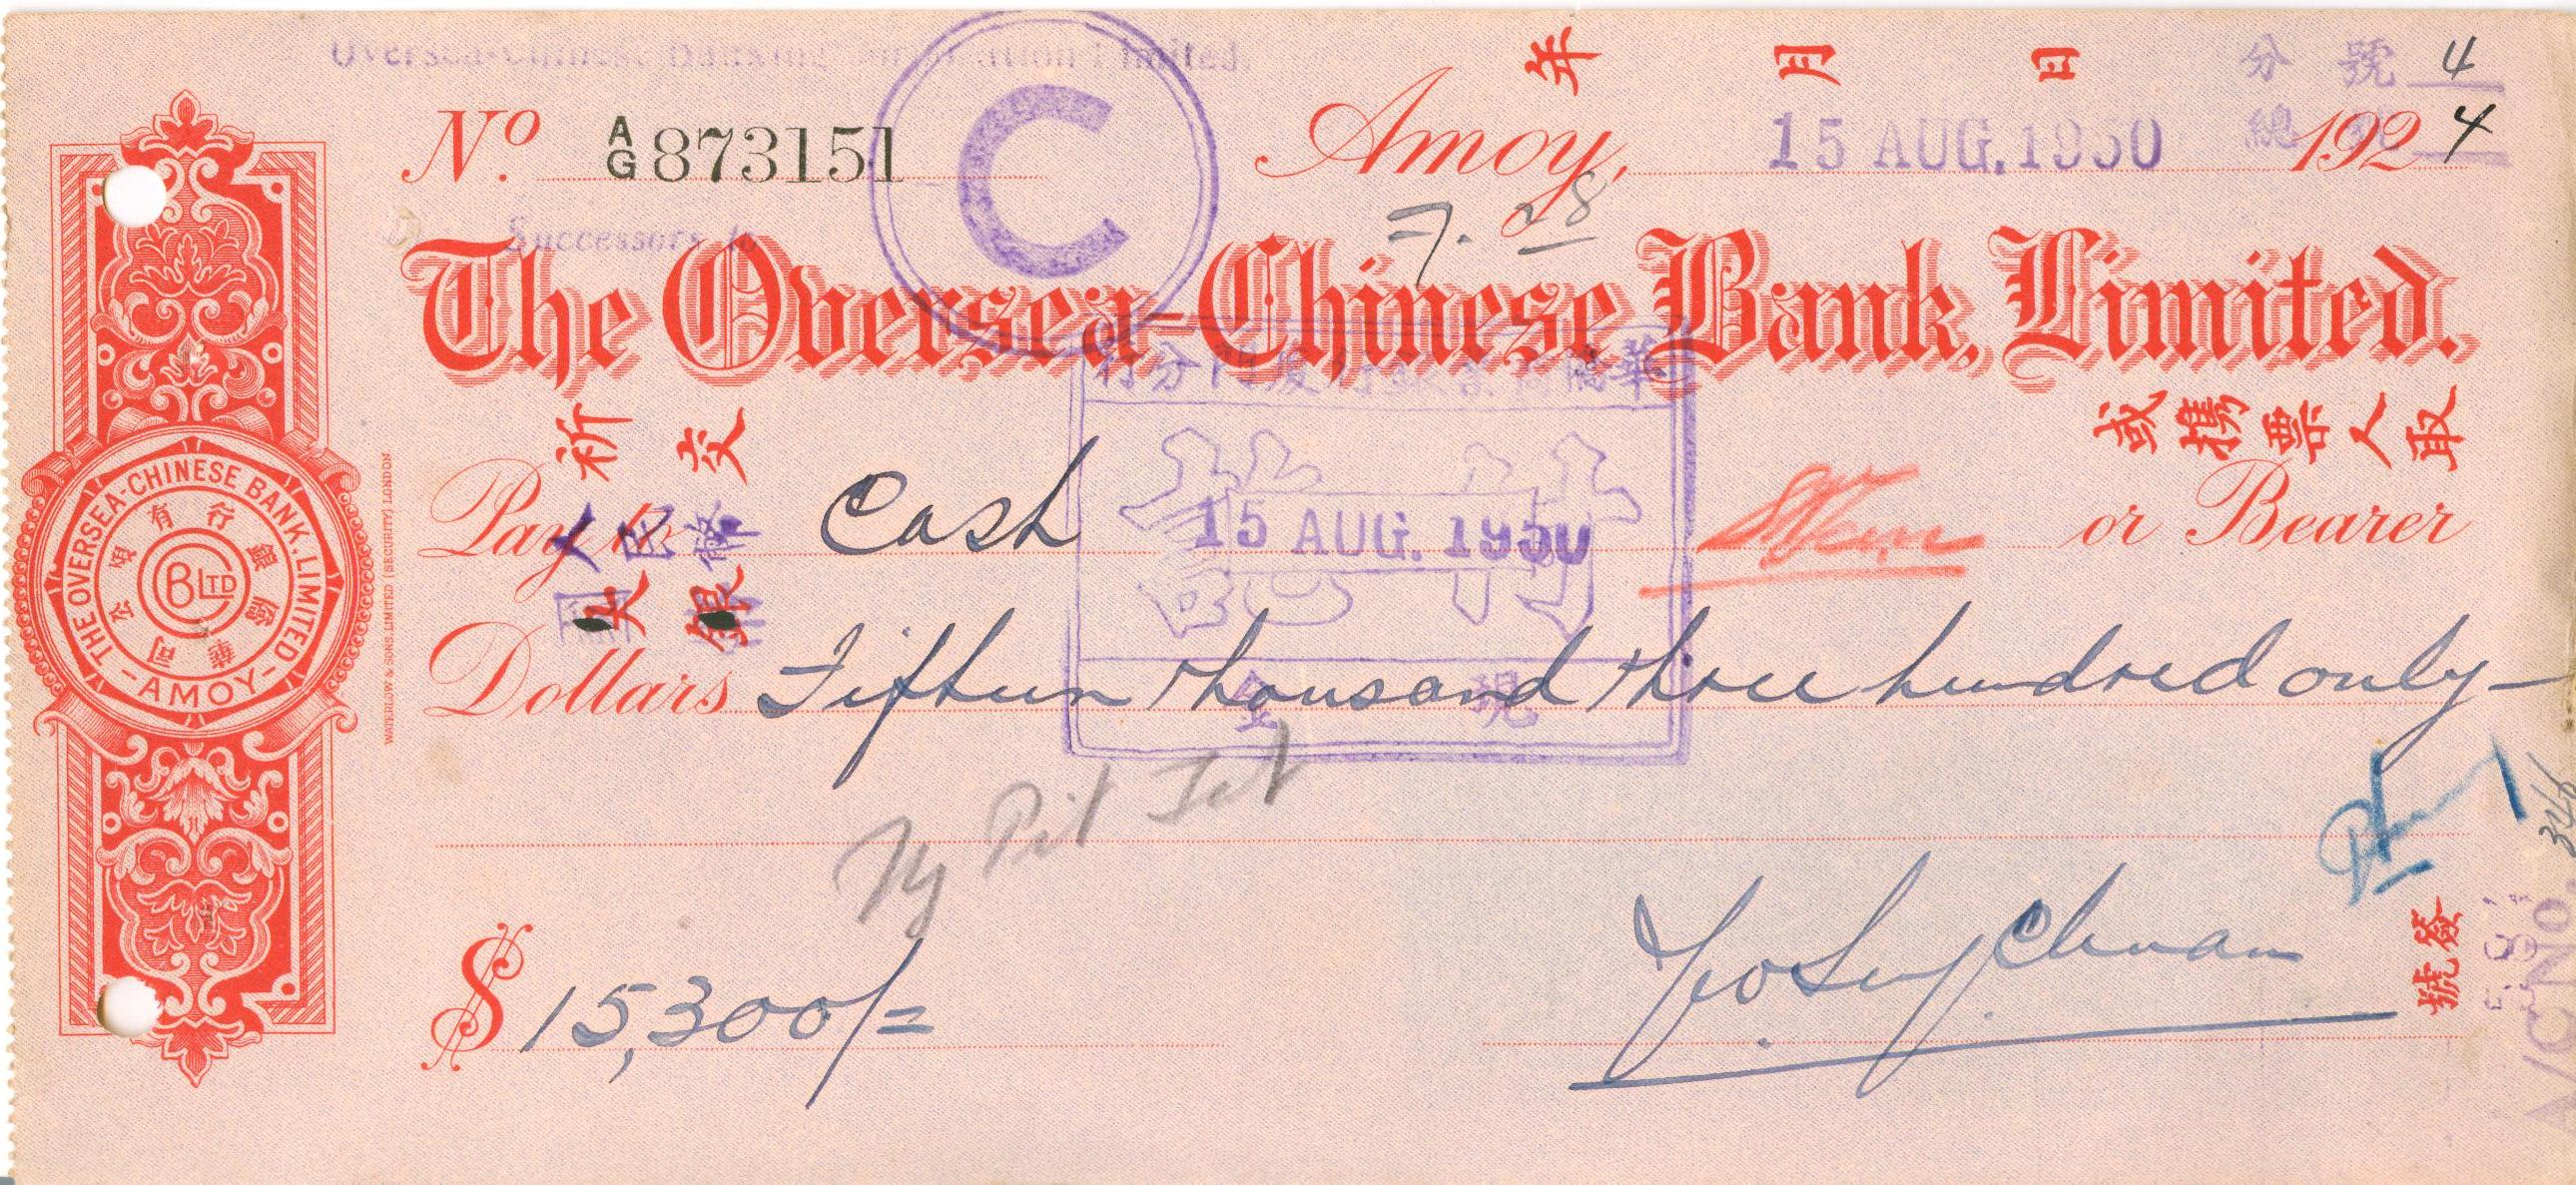 D2752, Check of Oversea-Chinese Bank Limited (Shanghai), China Cheque 1950's